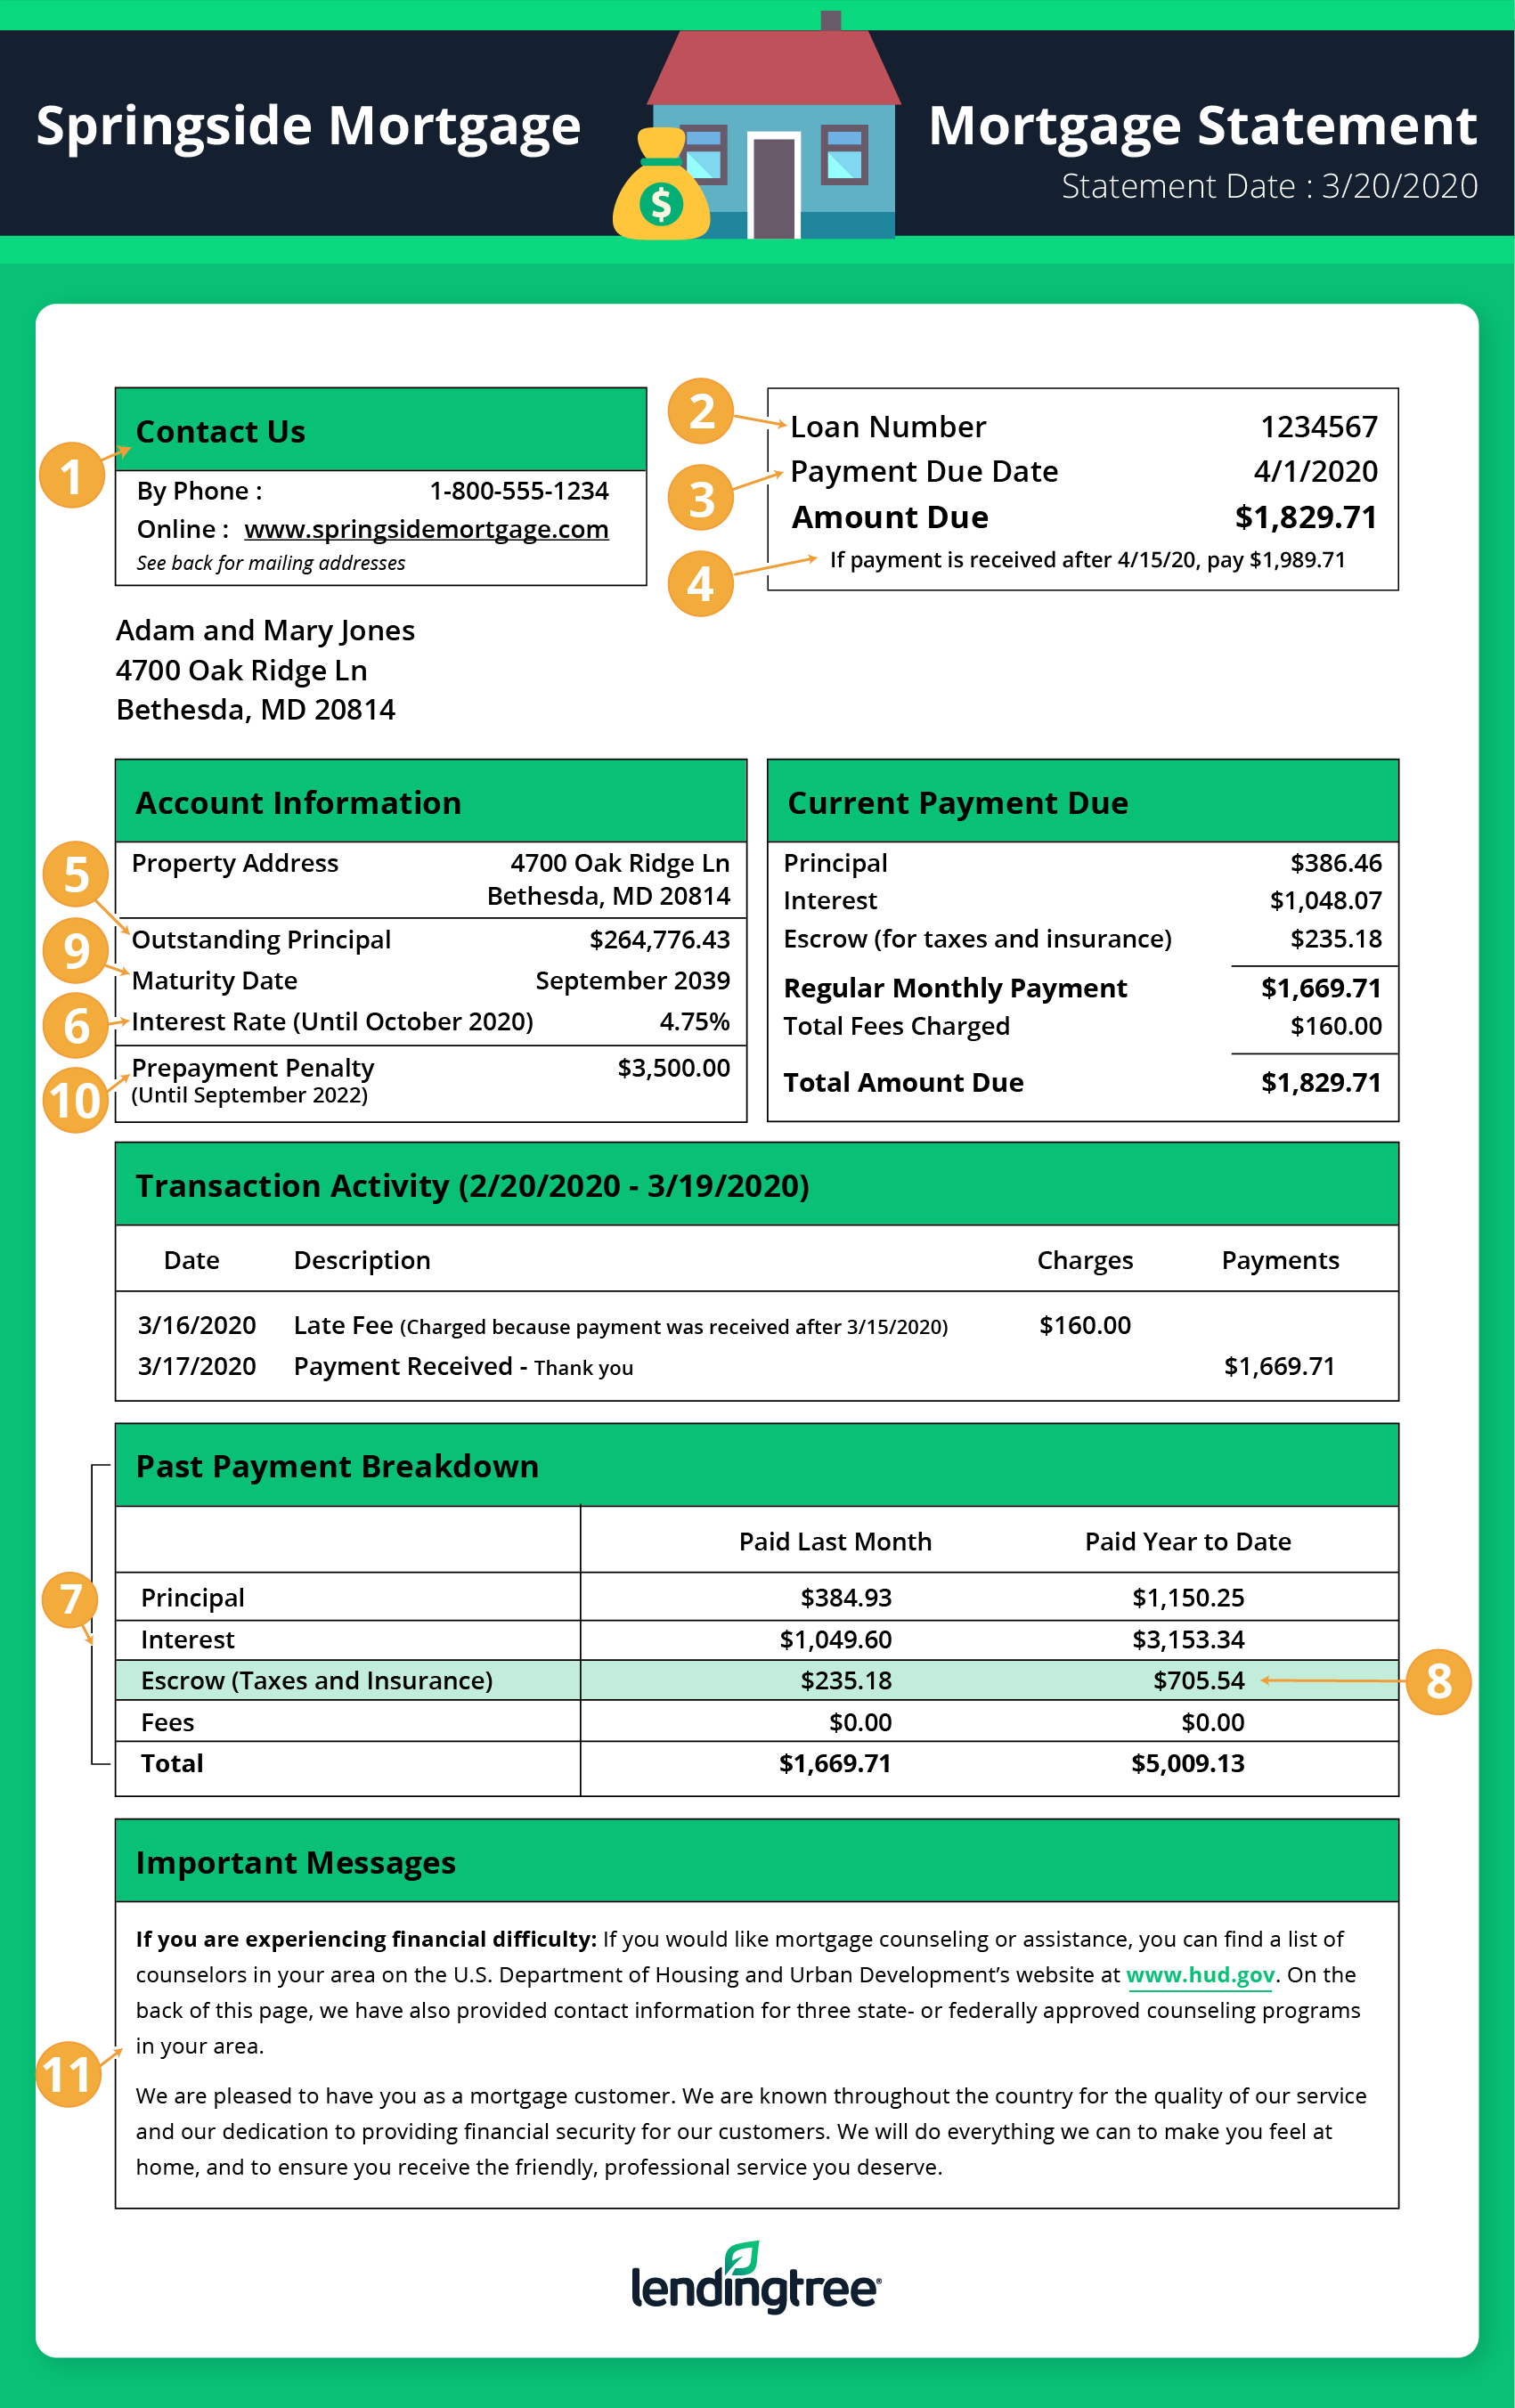 Mortgage Statement Template from www.lendingtree.com